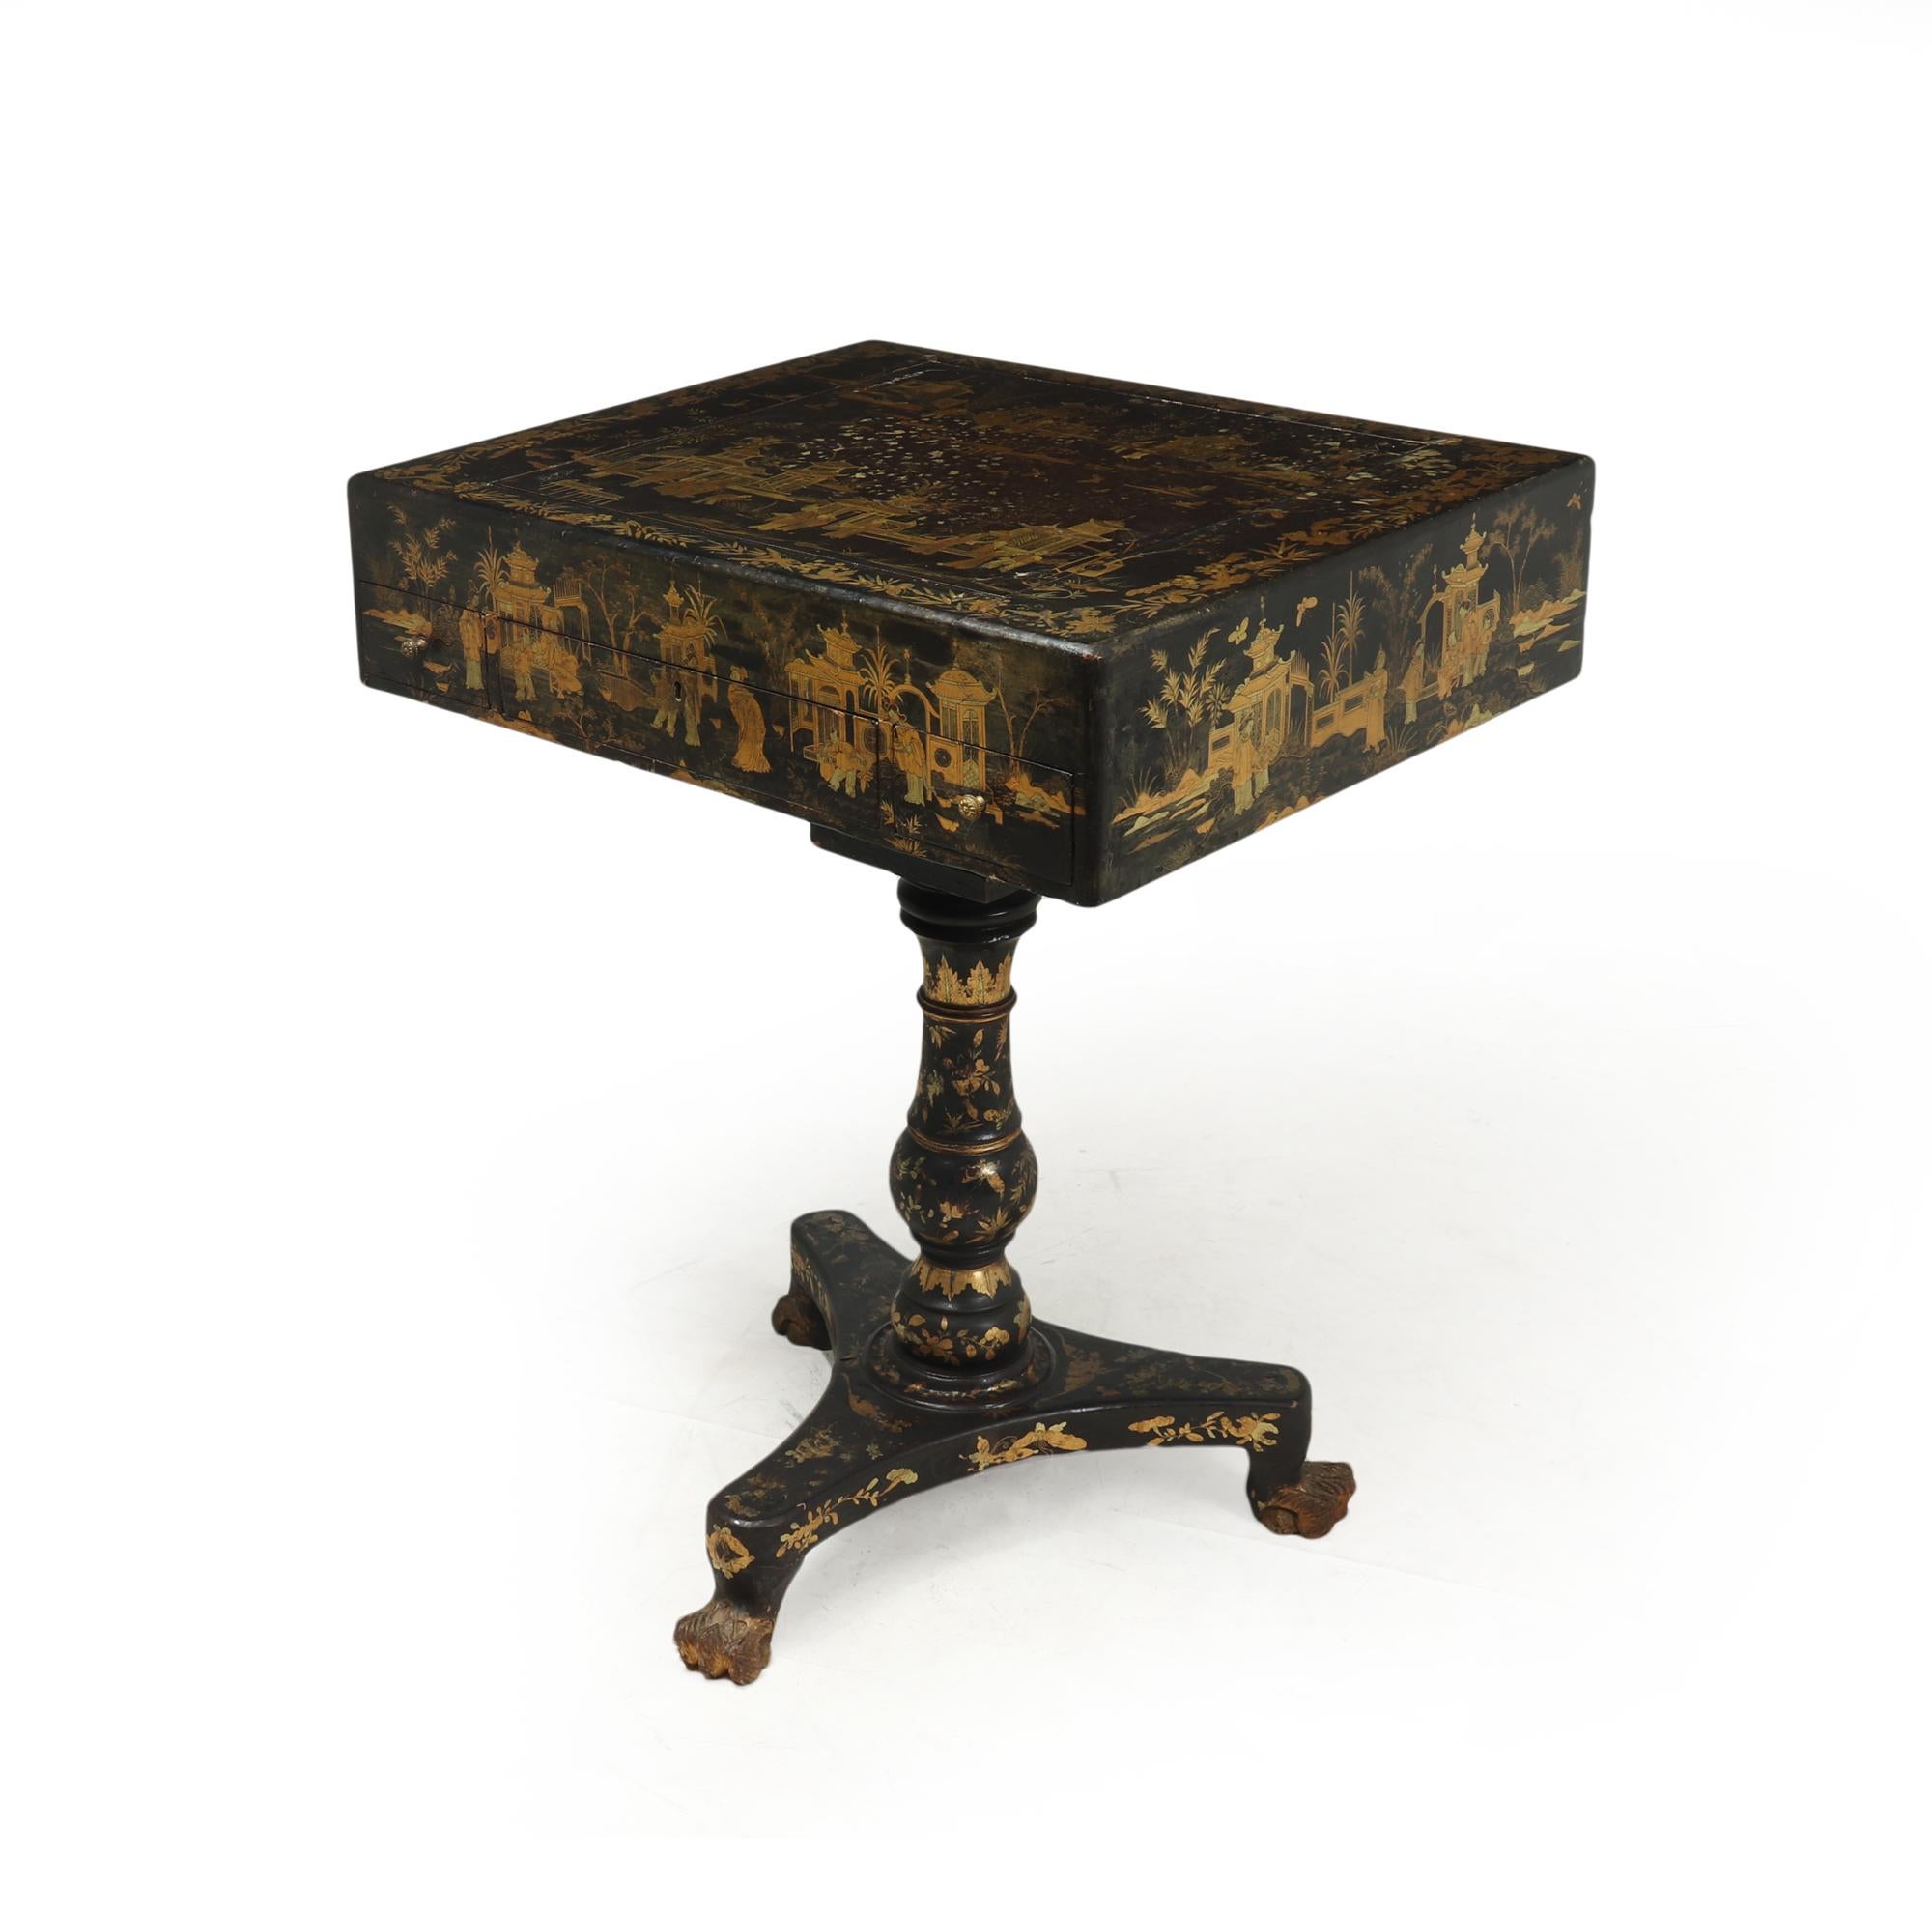 A very well preserved English Regency Chinese export games and side table with black lacqure and gold leaf chinoiserie, flip over center to reveal back gammon and chess board, detatcable top with ‘bird cage’ fitting, this games table would have been